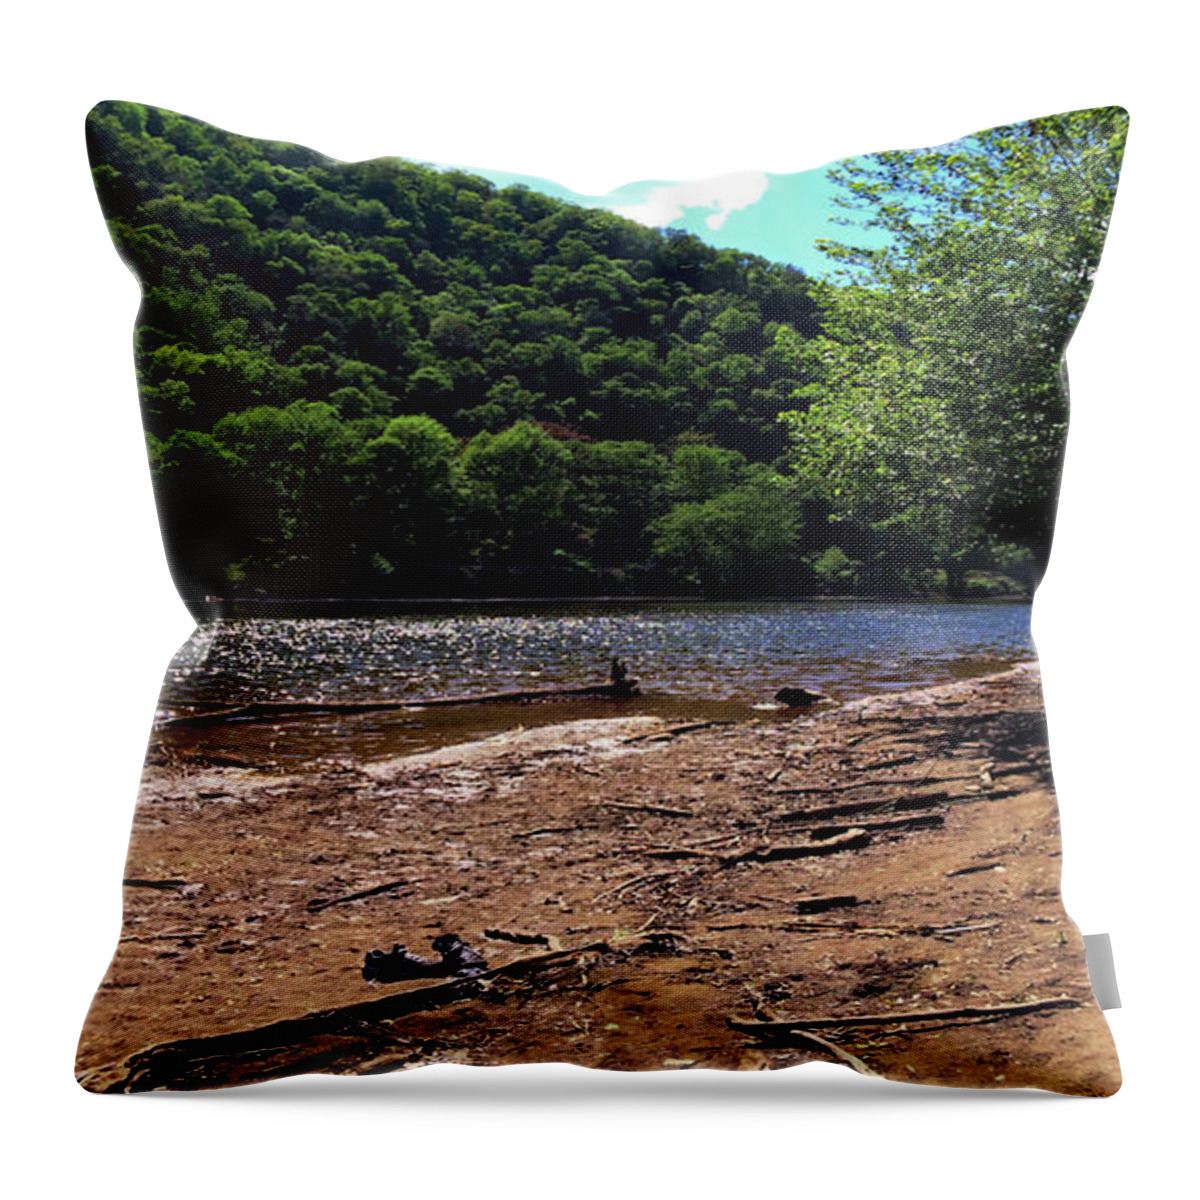 Delaware River Sneakers Throw Pillow featuring the photograph Delaware River Sneakers by Femina Photo Art By Maggie